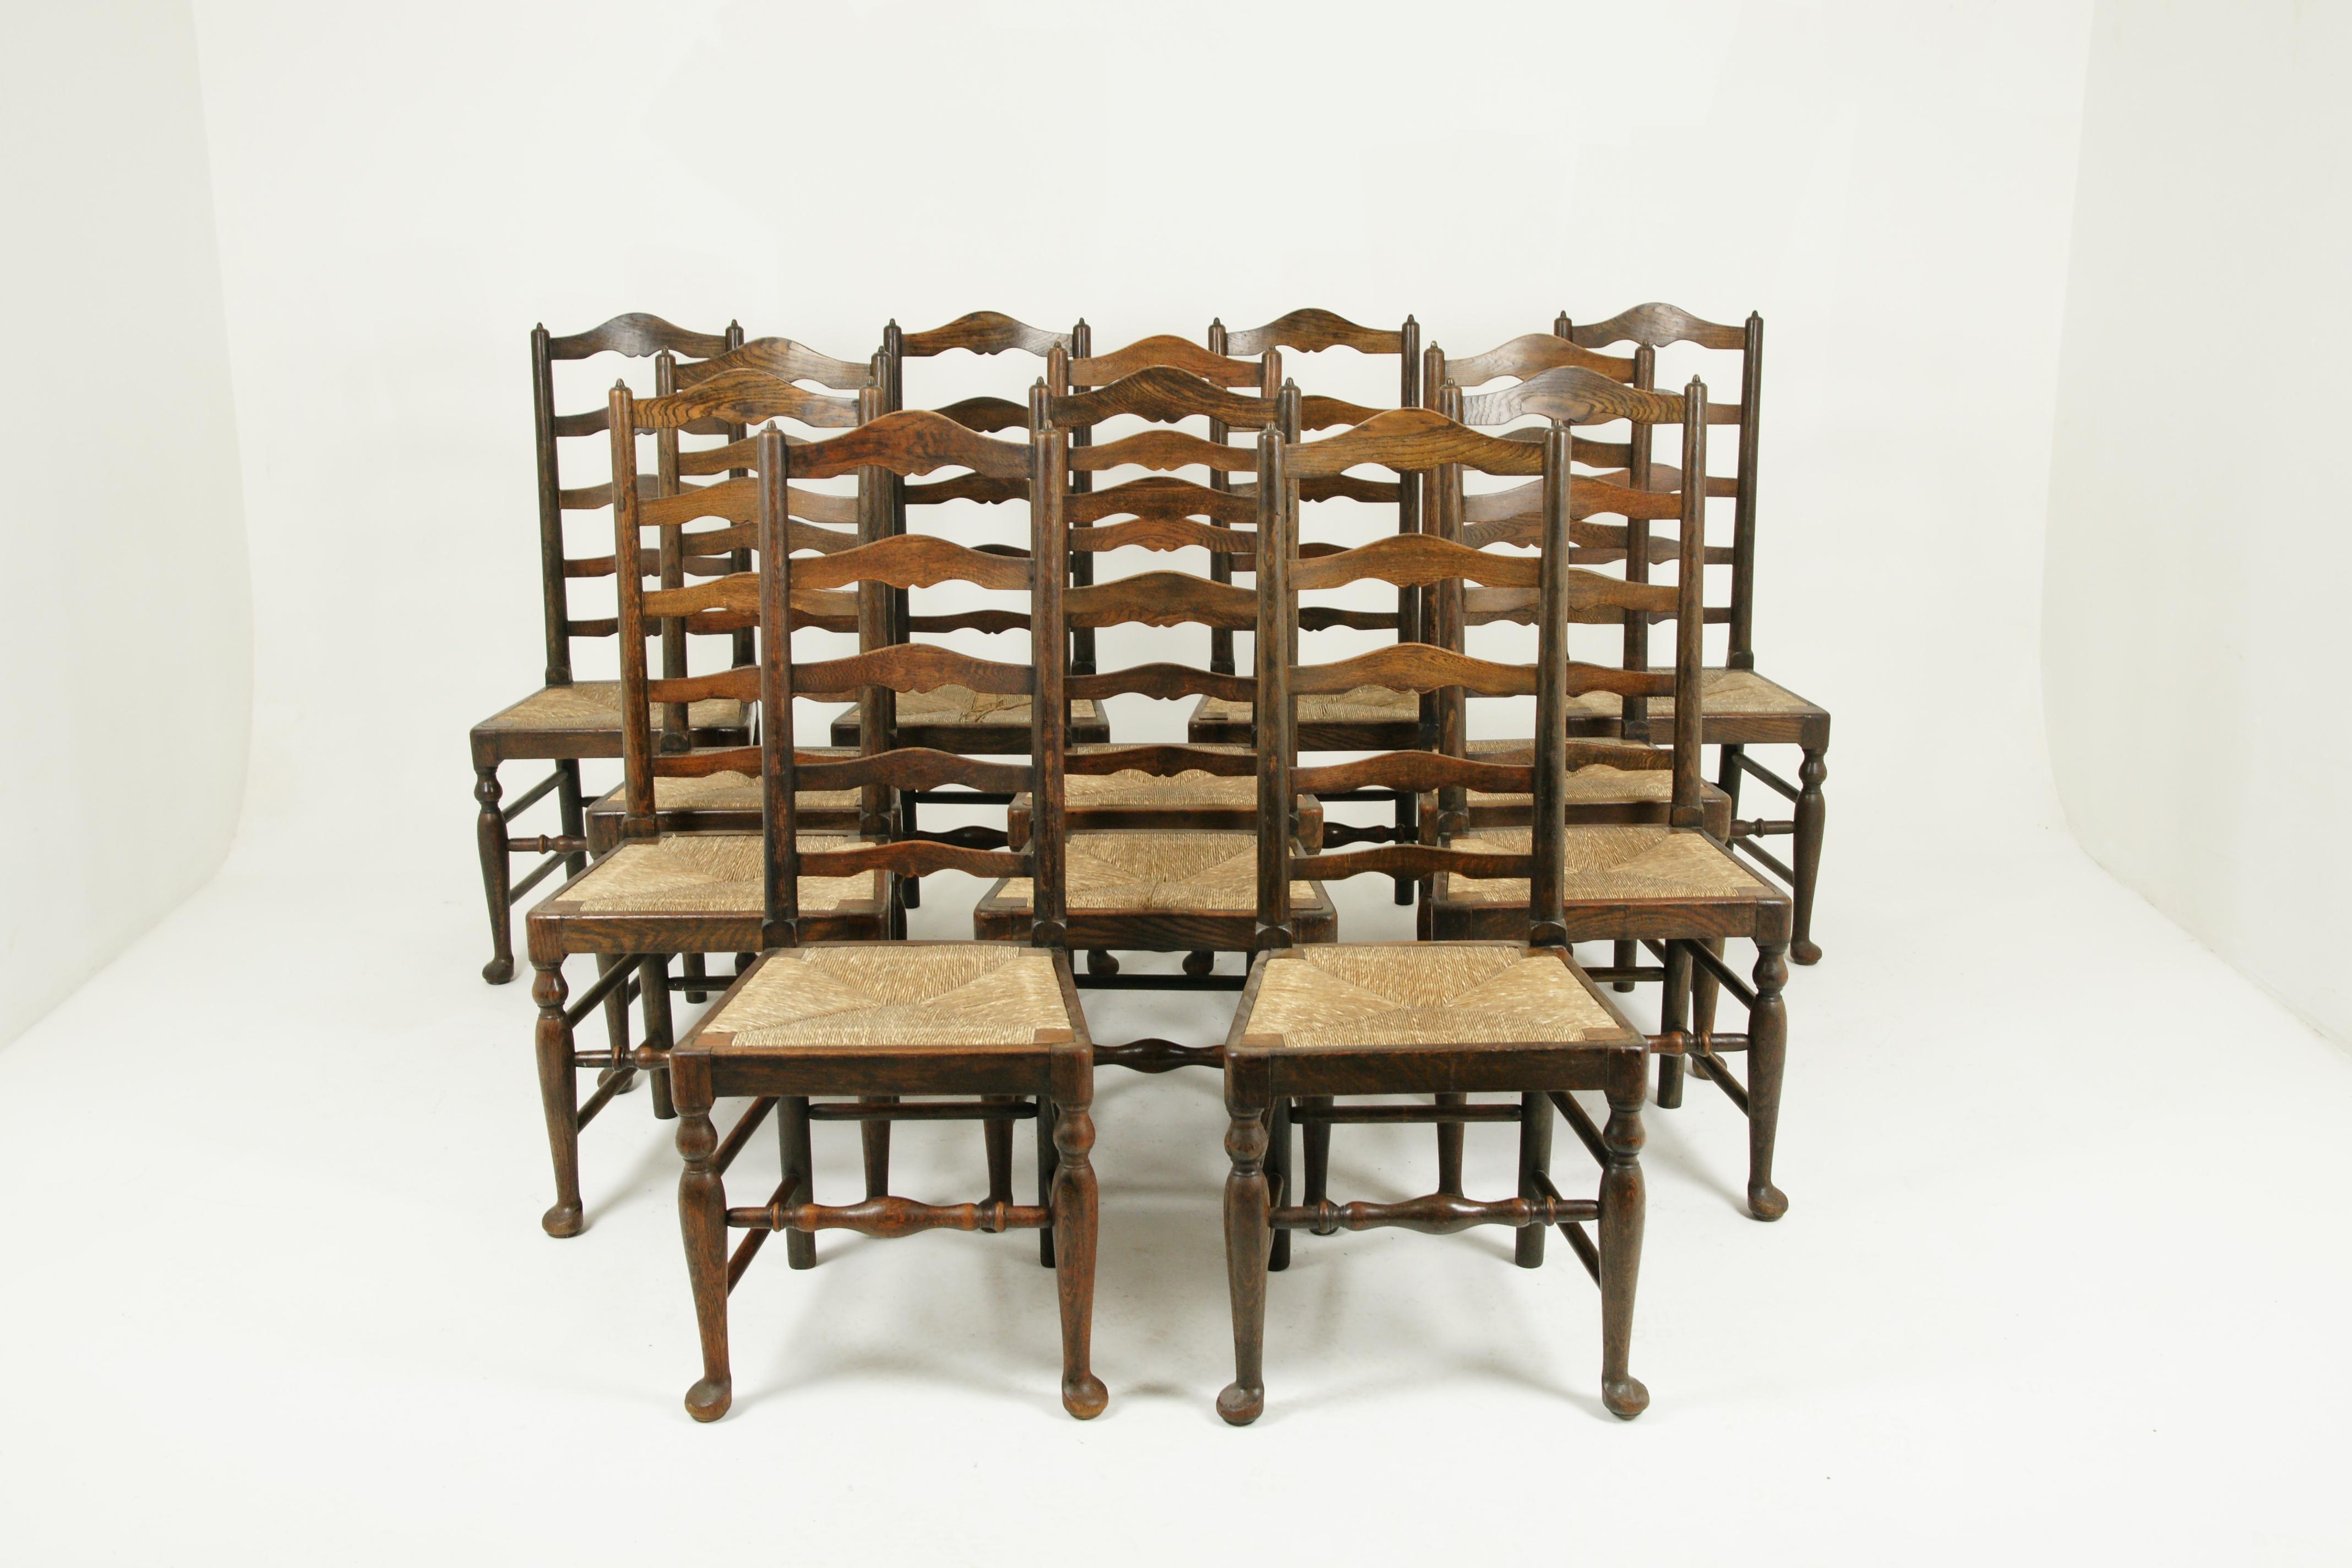 Scottish Rush Seat Chairs, Set of 14 Chairs, 12+2 Chairs, 14 Dining Chairs, 1920